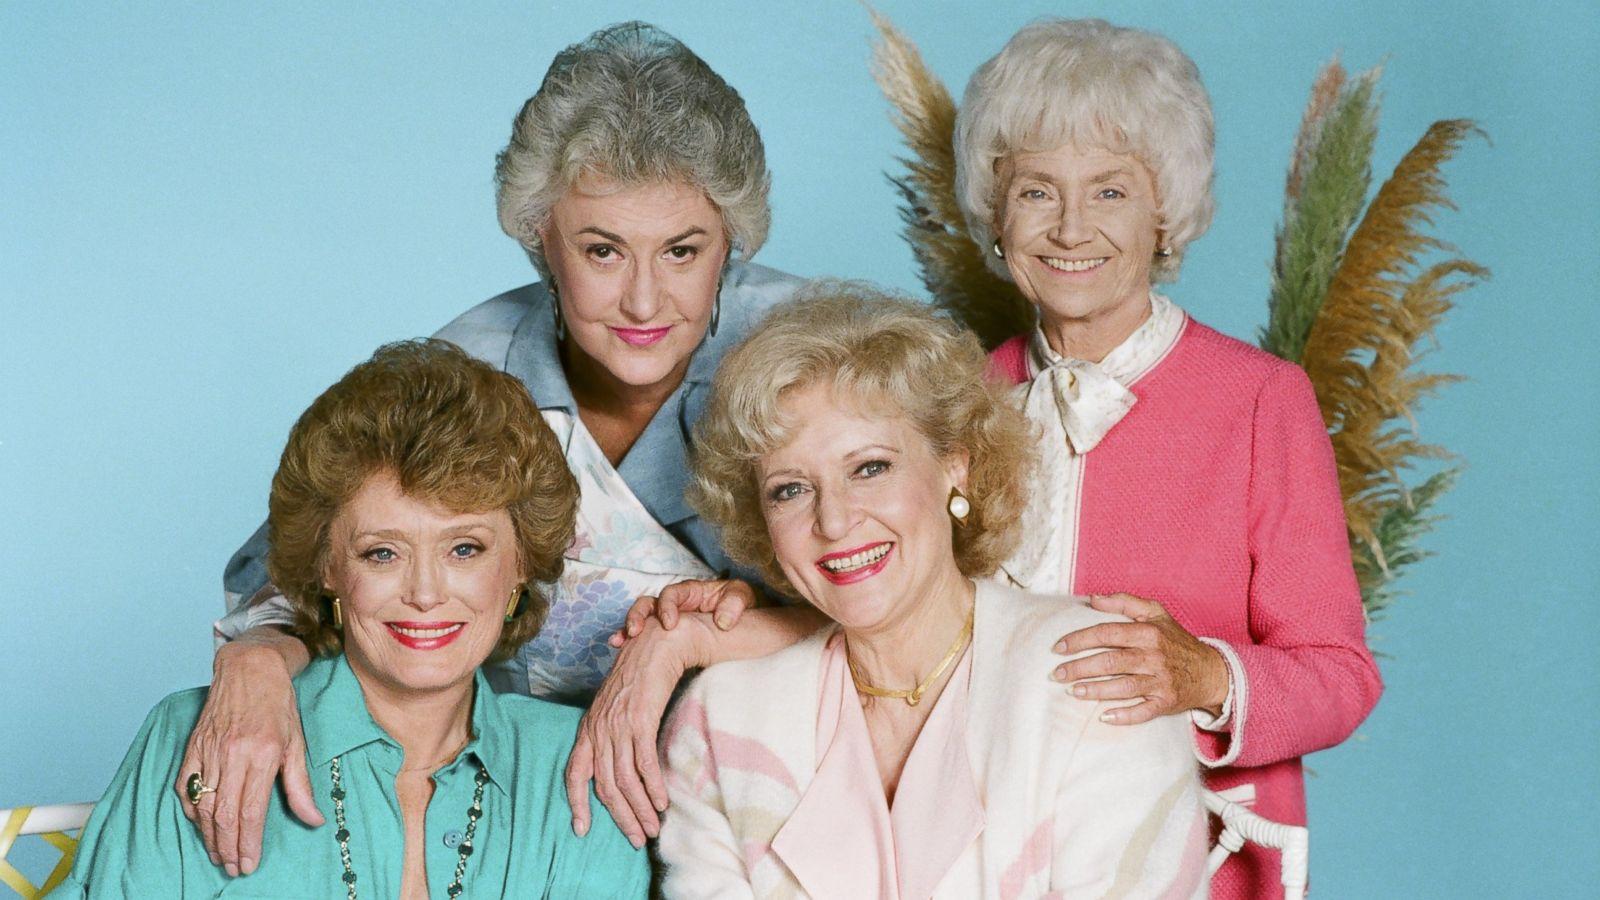 The Golden Girls' Turns 30: Facts You May Not Know About the Series